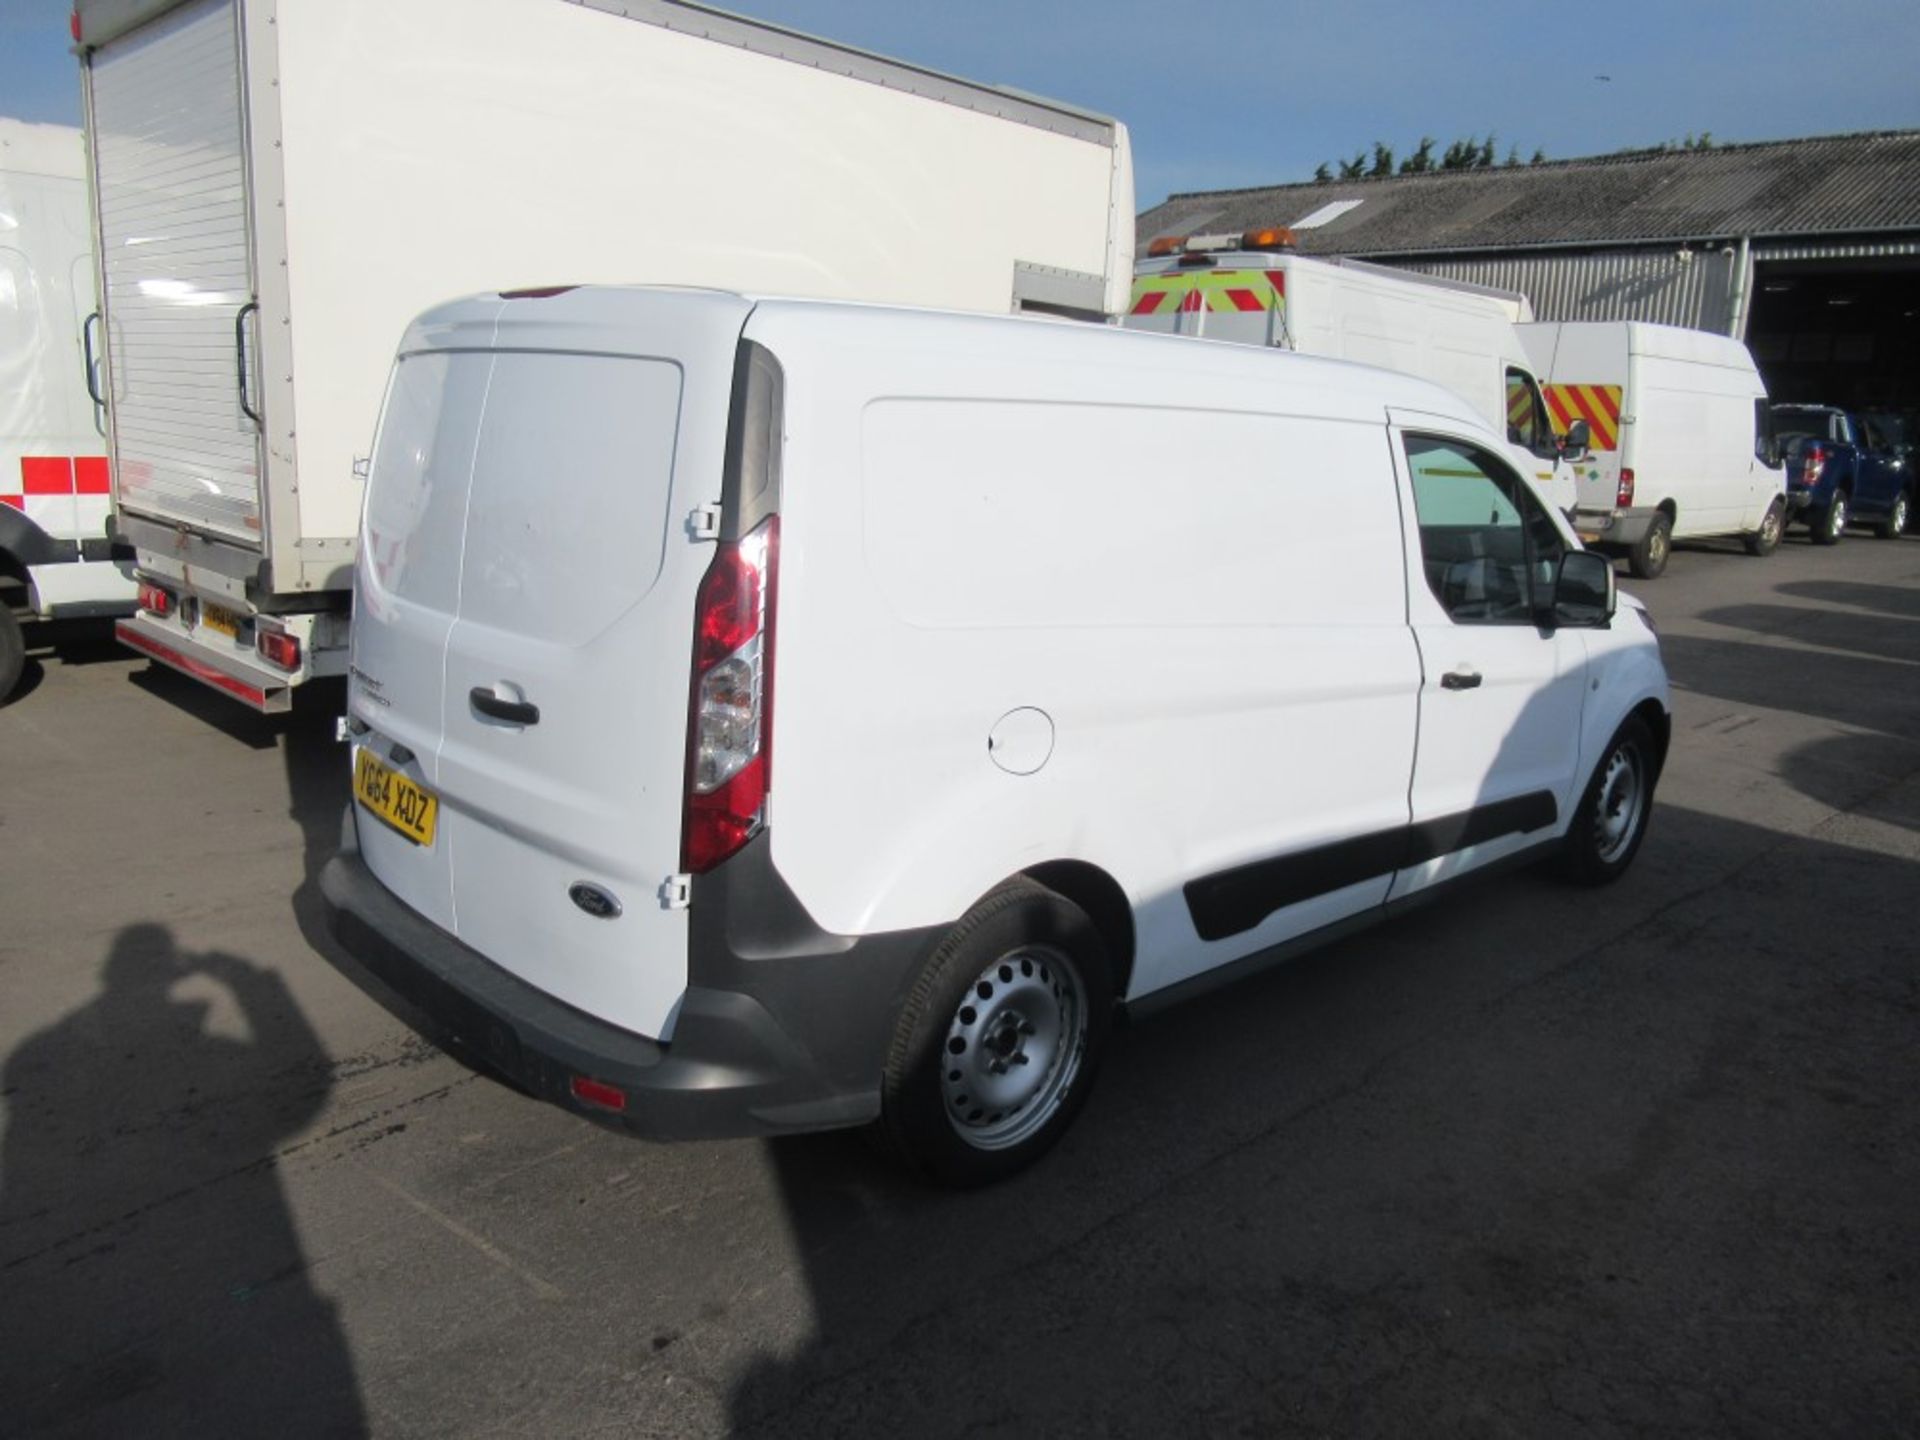 64 reg FORD TRANSIT CONNECT 210 ECO-TECH C/W REACH & WASH SYSTEM IN REAR, 1ST REG 09/14, 120053M - Image 4 of 7